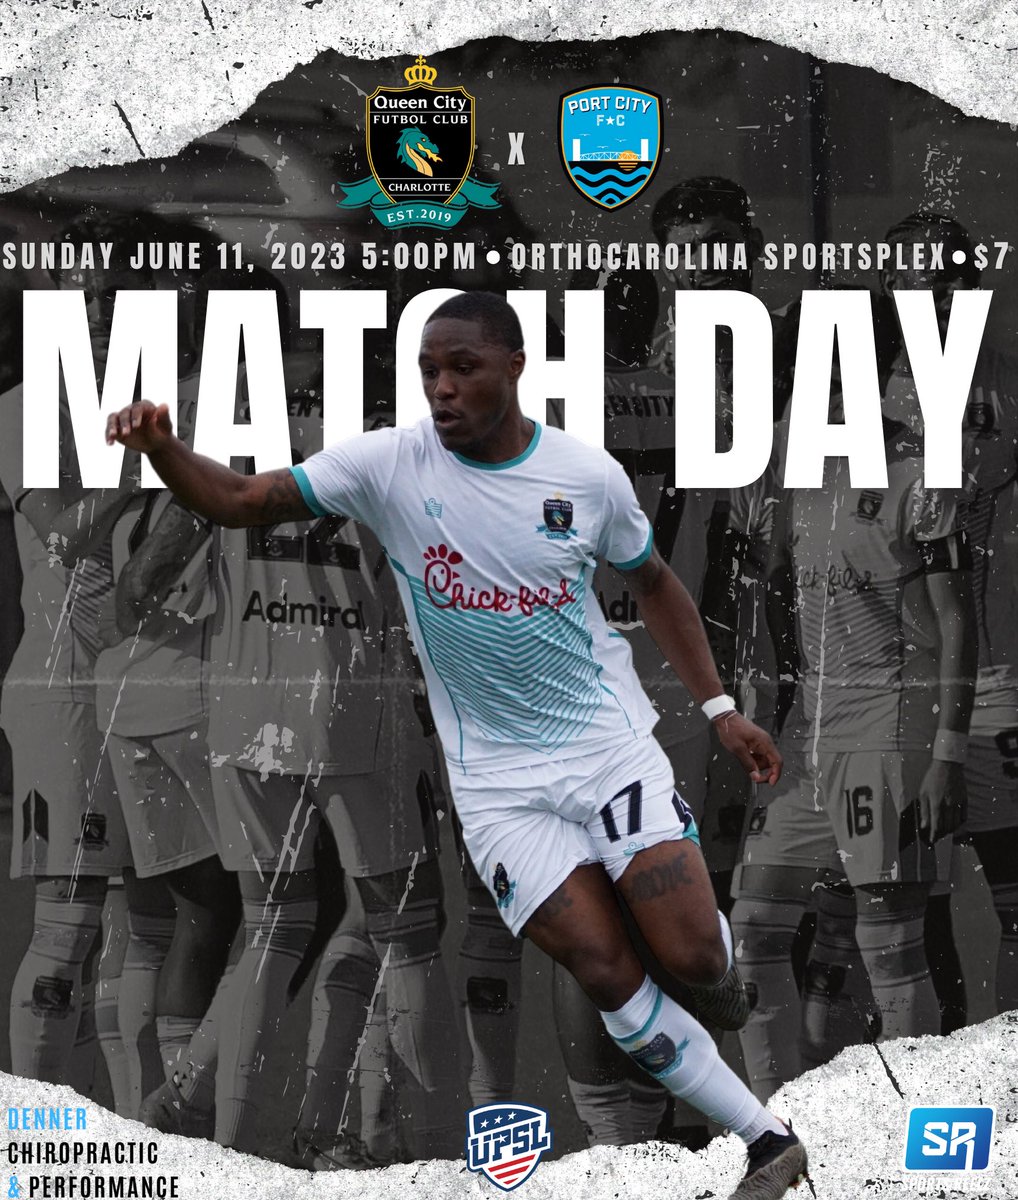 Get up it’s Match Day! This afternoon we take on Port City FC in the UPSL Mid-Atlantic Quarterfinals! 

🆚: Port City FC
🎟️: $7
🏟️: Orthocarolina Sportsplex 
⏰: 5:00PM EST

#upsl #soccer #queencity #charlotte #matchday #Playoffs #quarterfinals #feeltheburn #upinflames